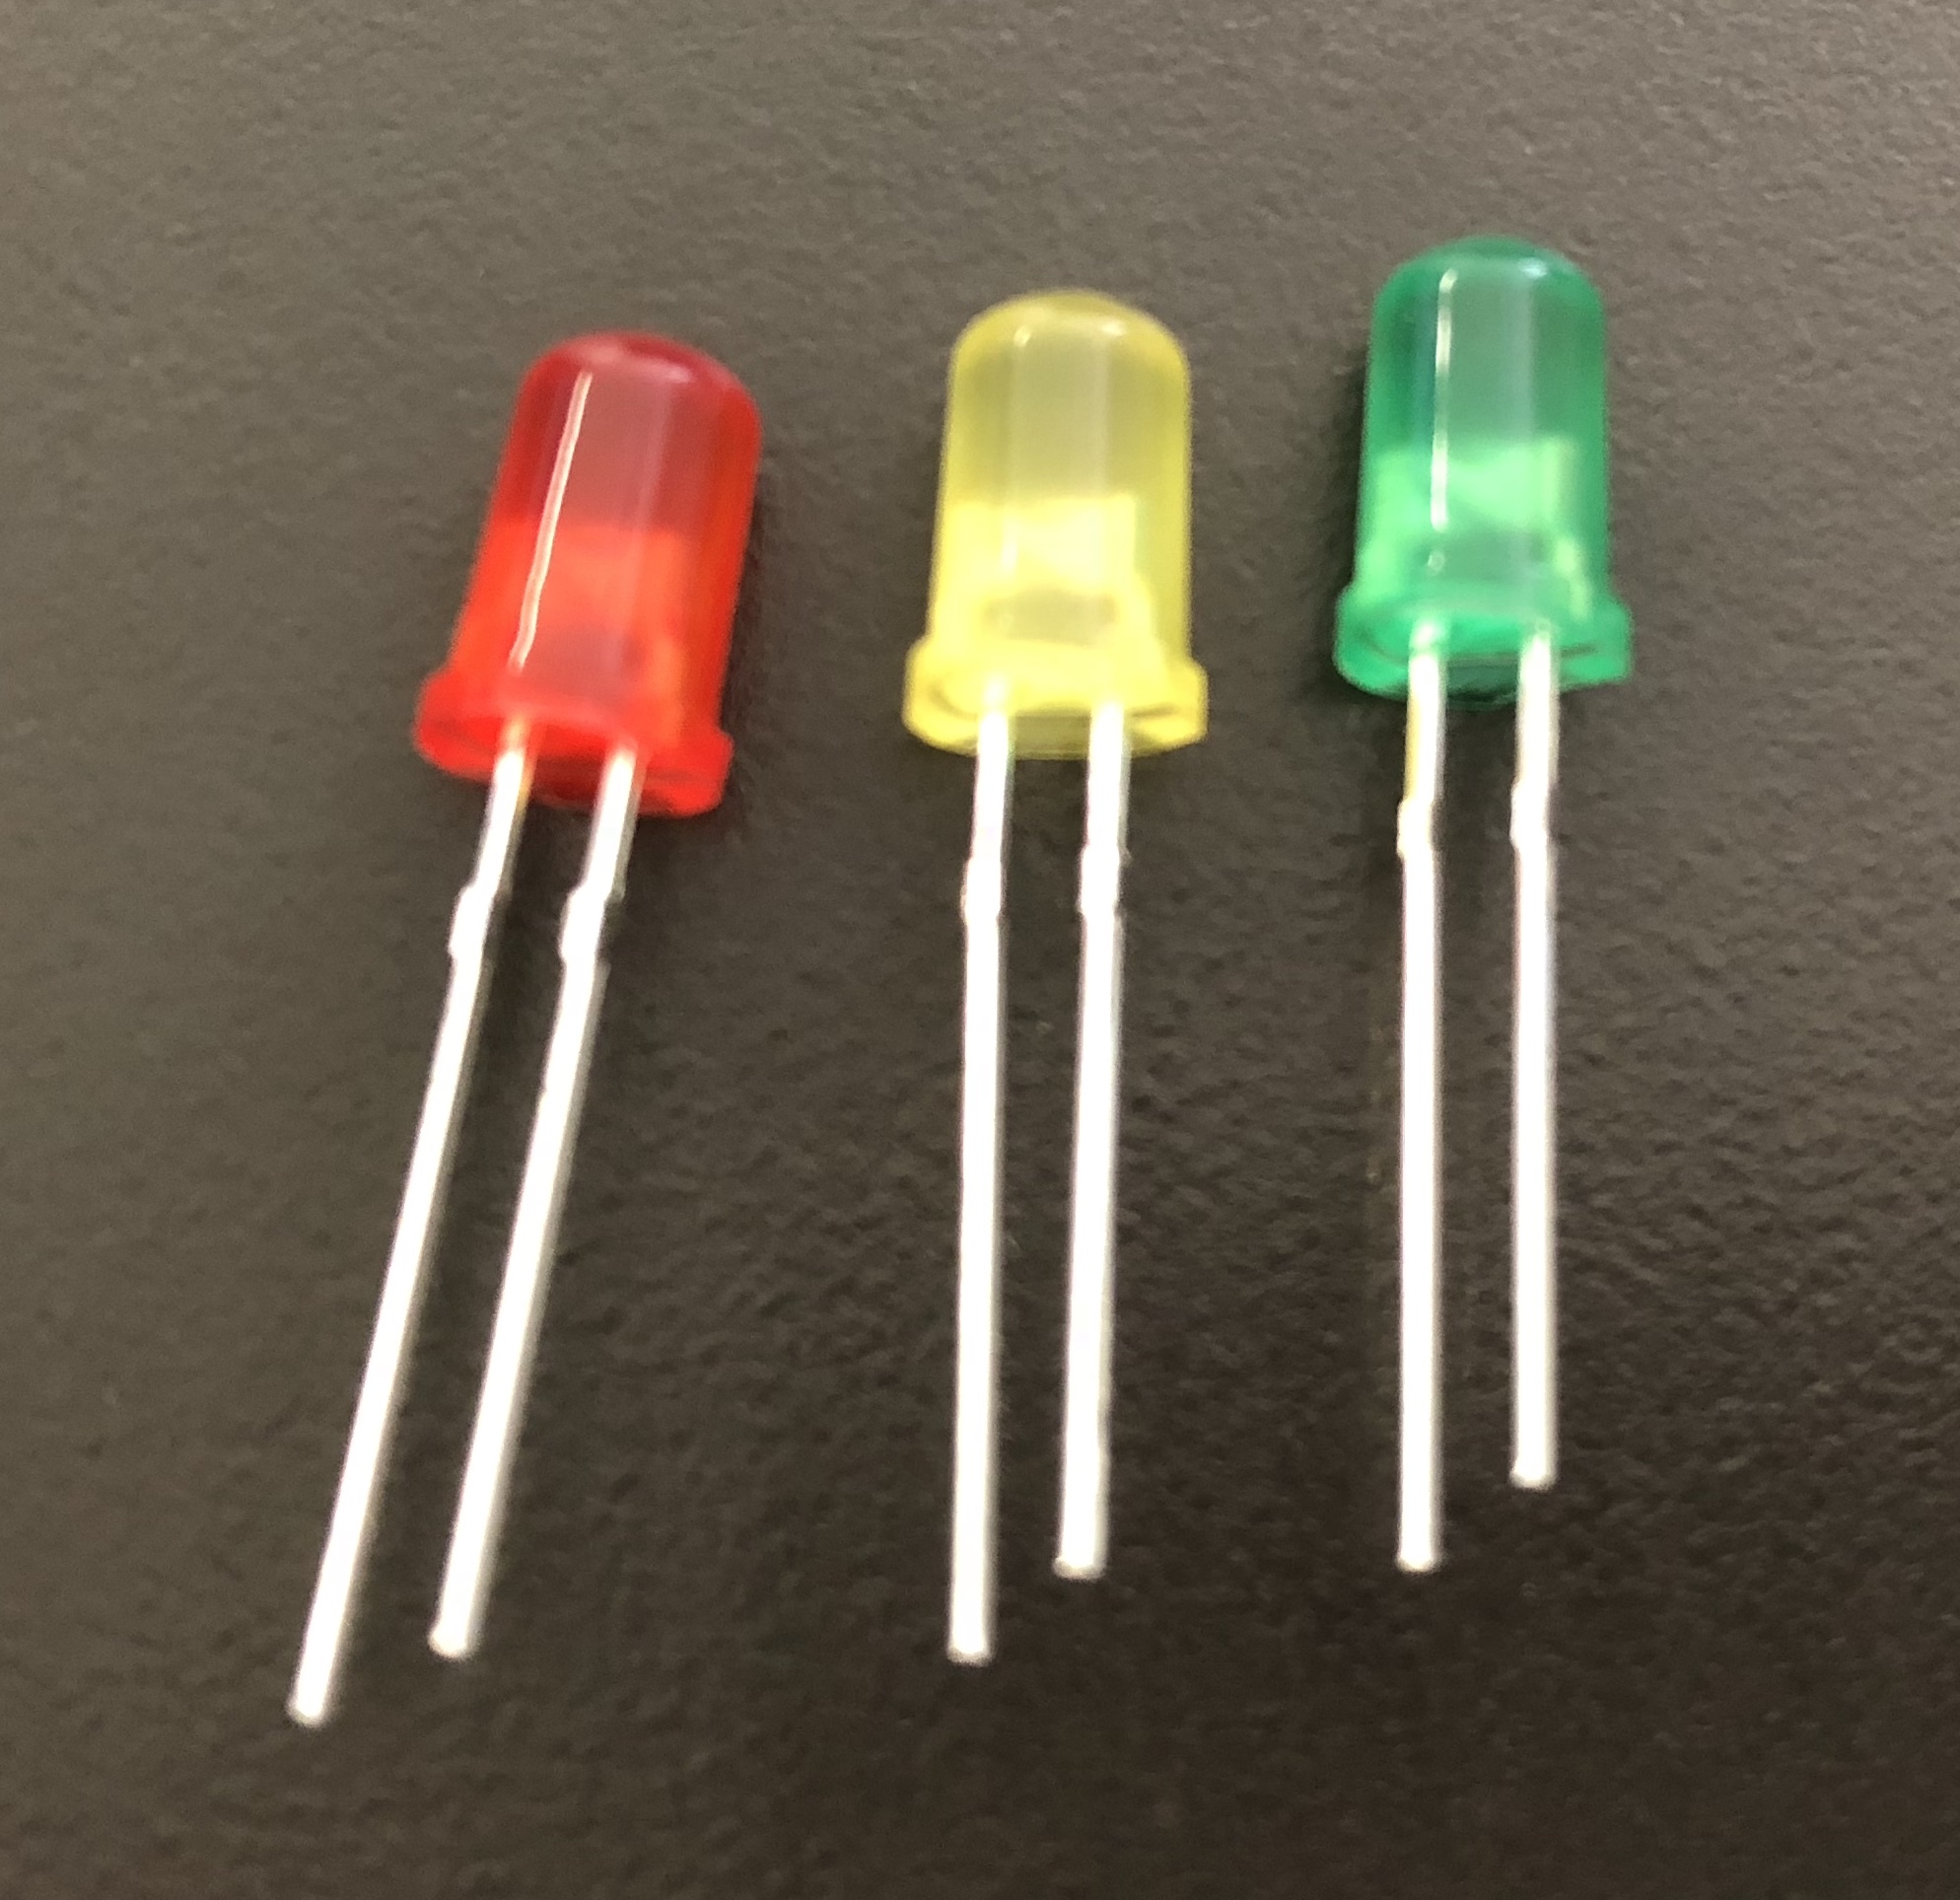 red, green, and yellow LEDs